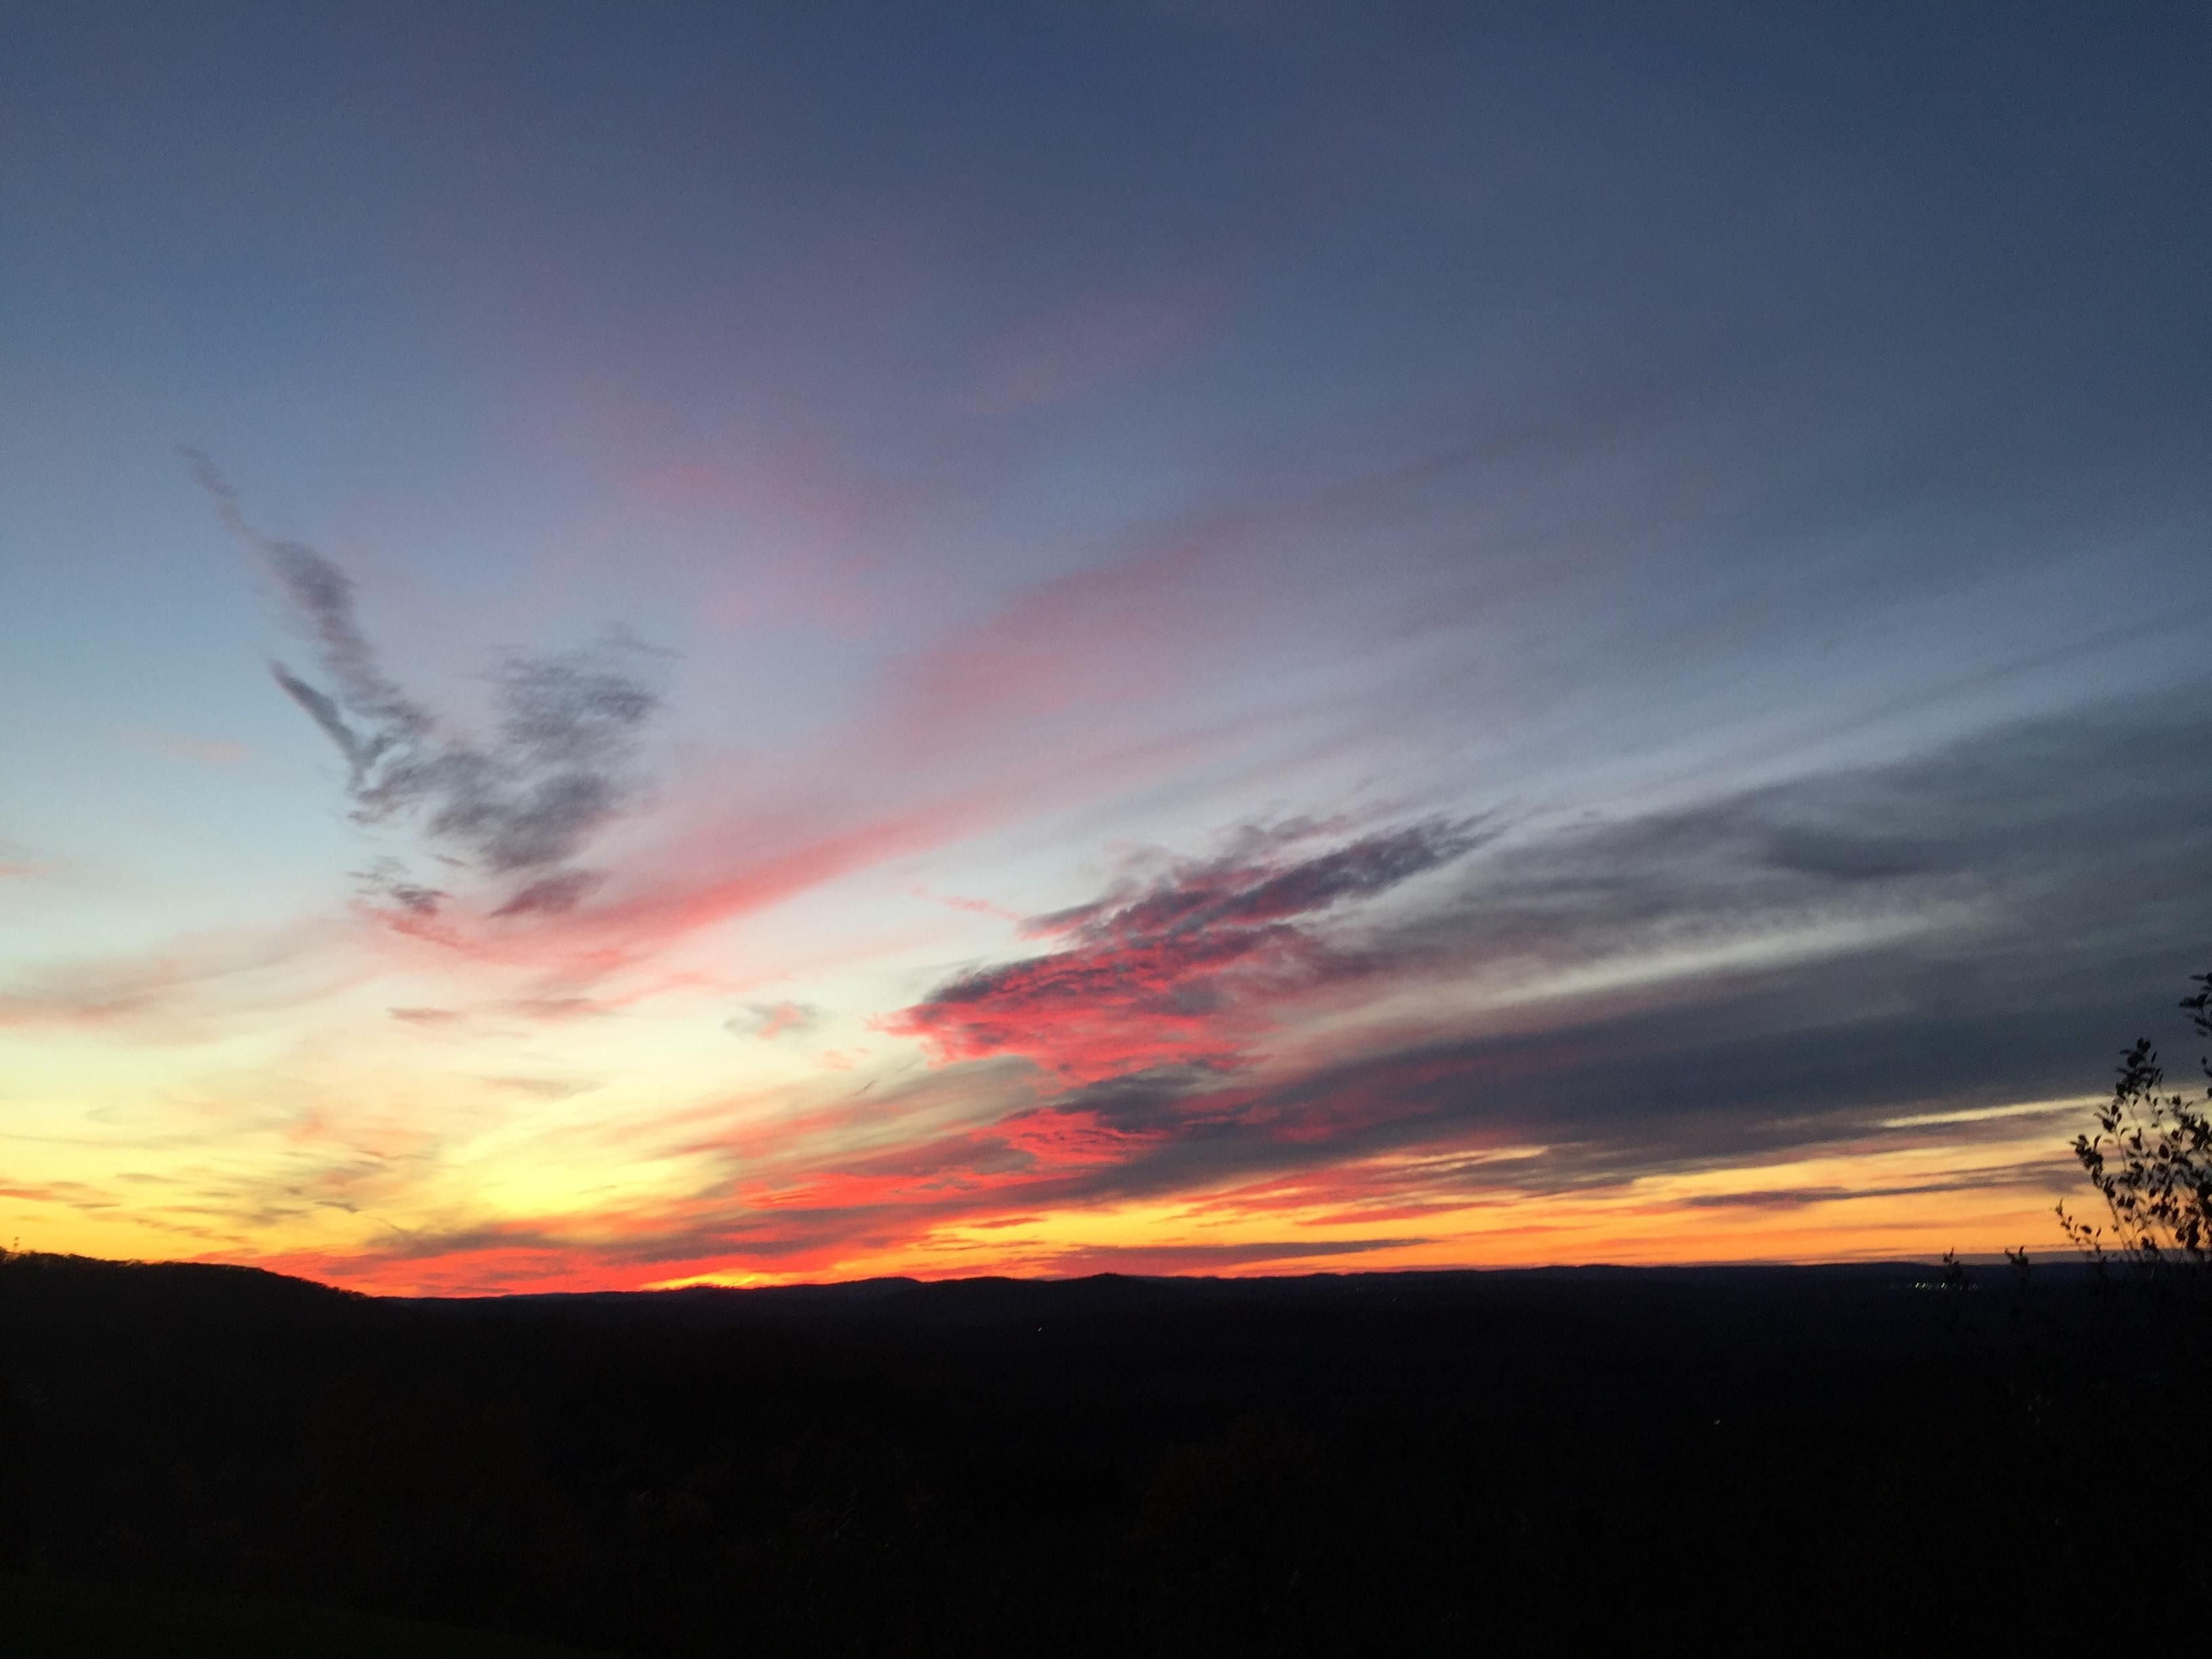 Sky during sunset in Putnam County NY [3264x2448] [OC] | Sky on ...